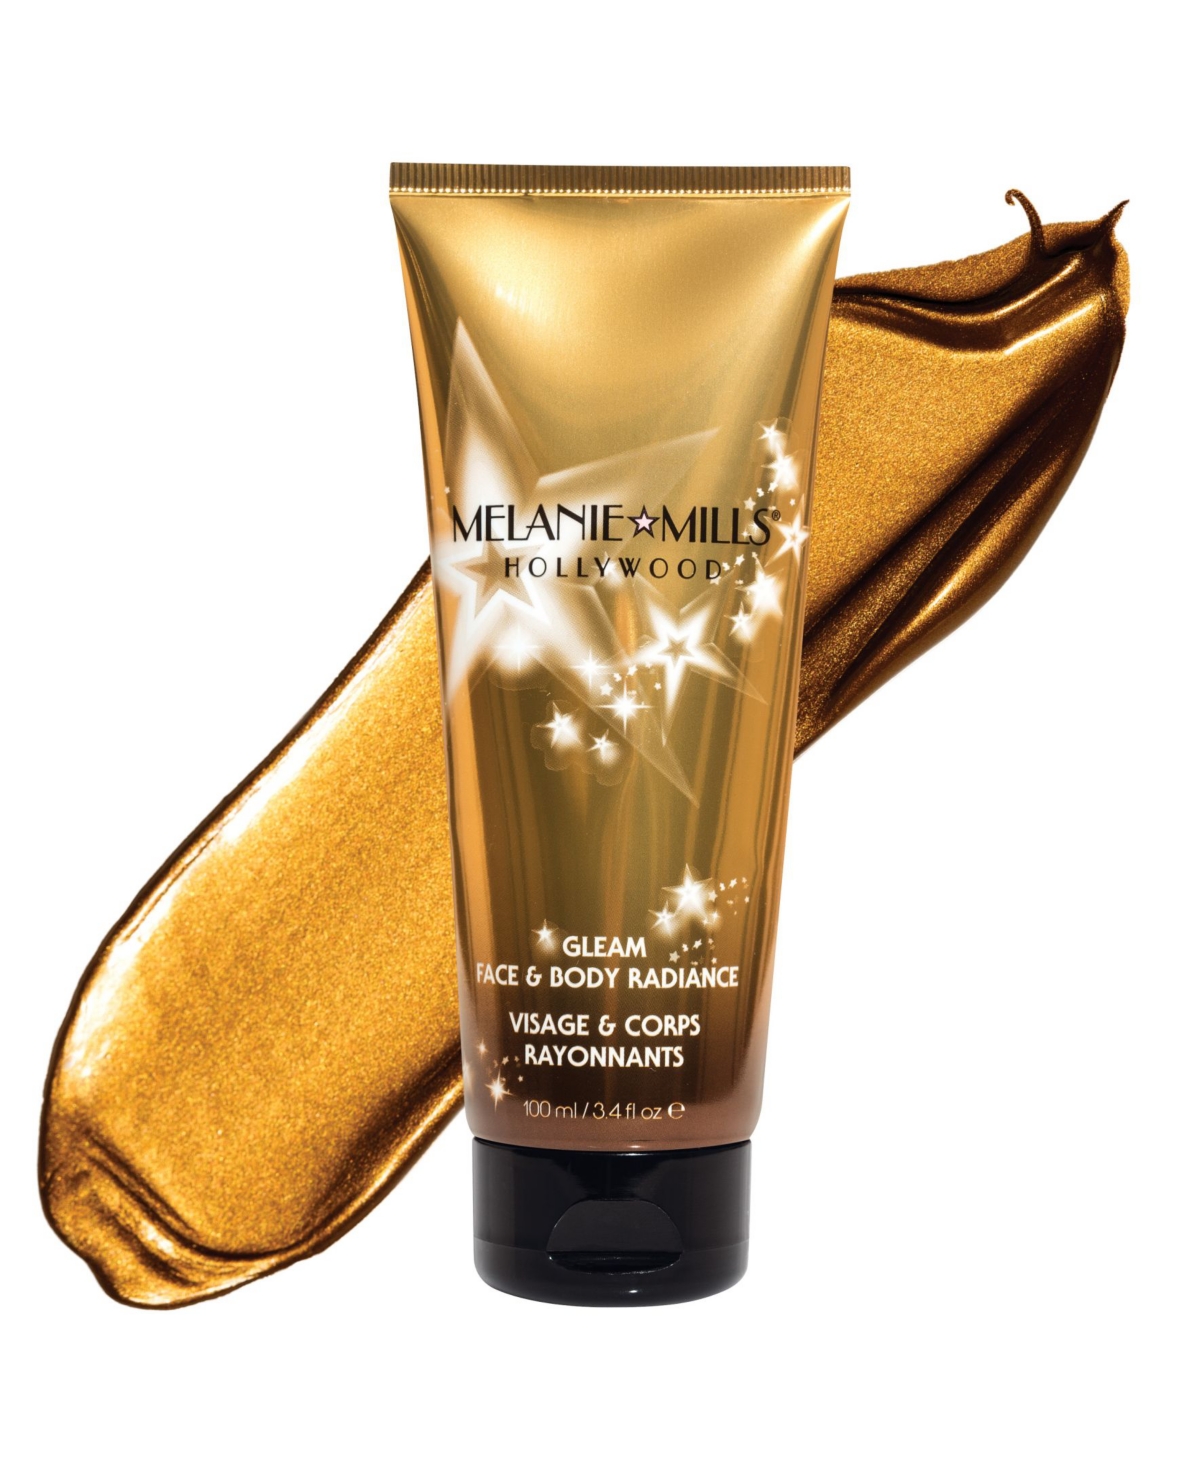 Gleam Face and Body Radiance All in One Makeup, Moisturizer and Glow, 3.4 oz - Peach Deluxe